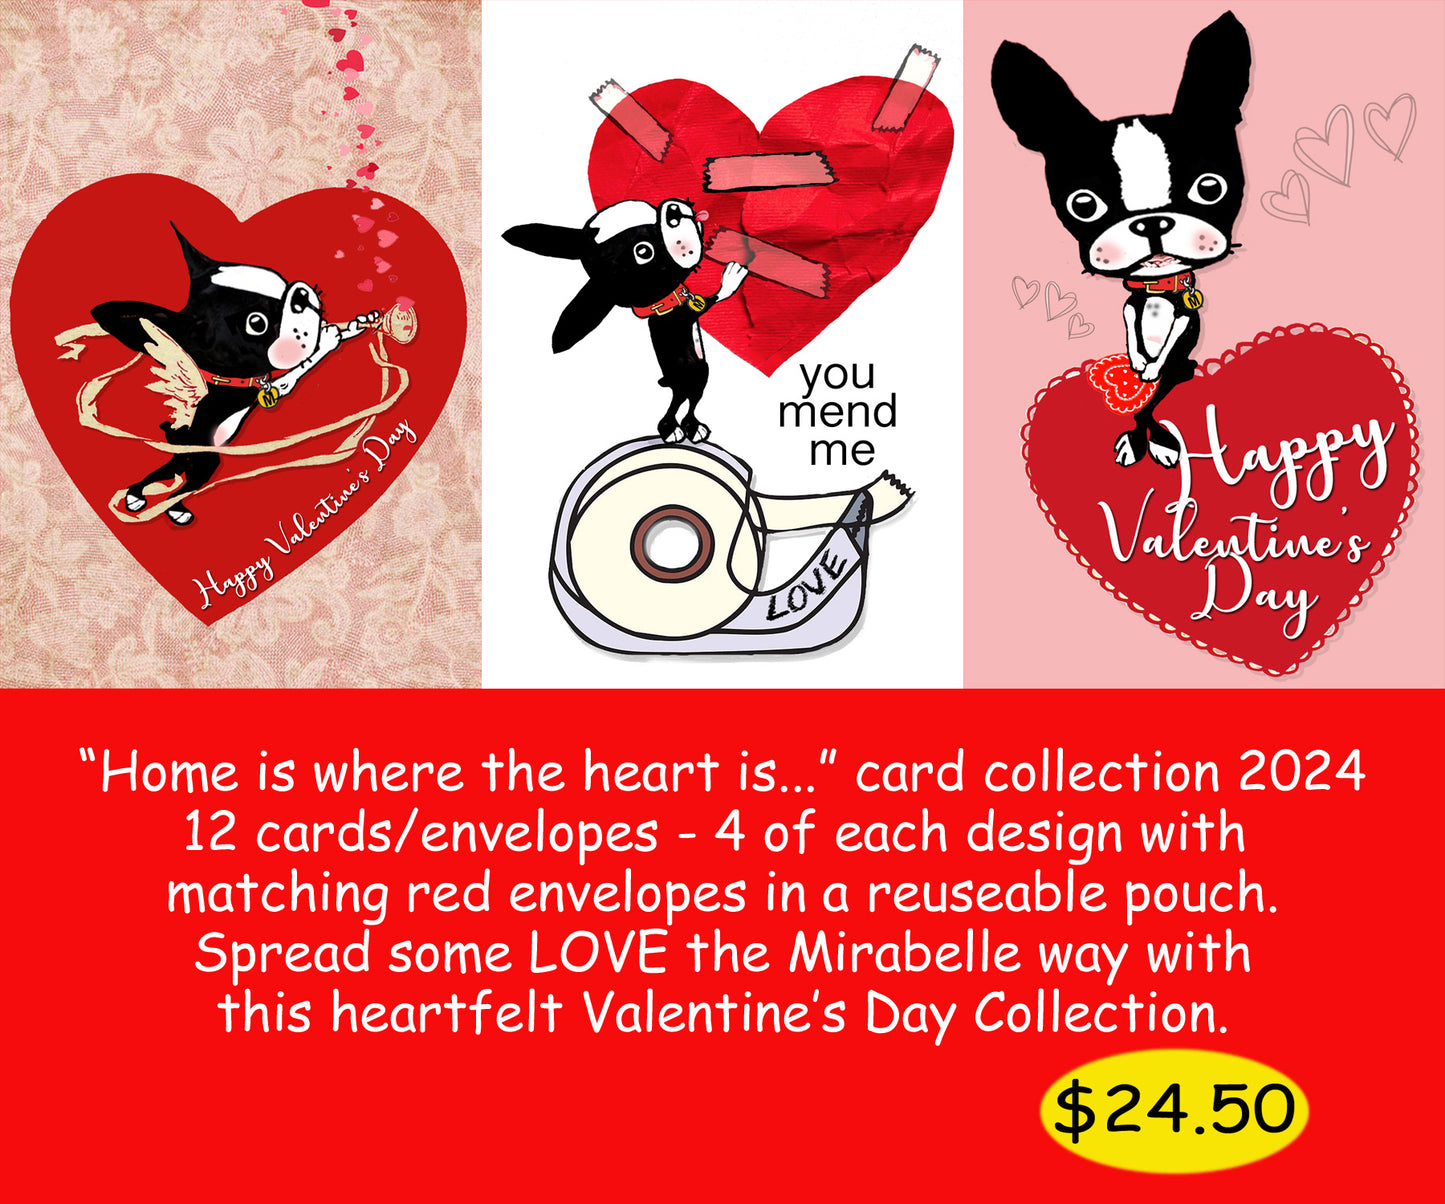 "Home is where the heart is" Valentine's Day collection 2024